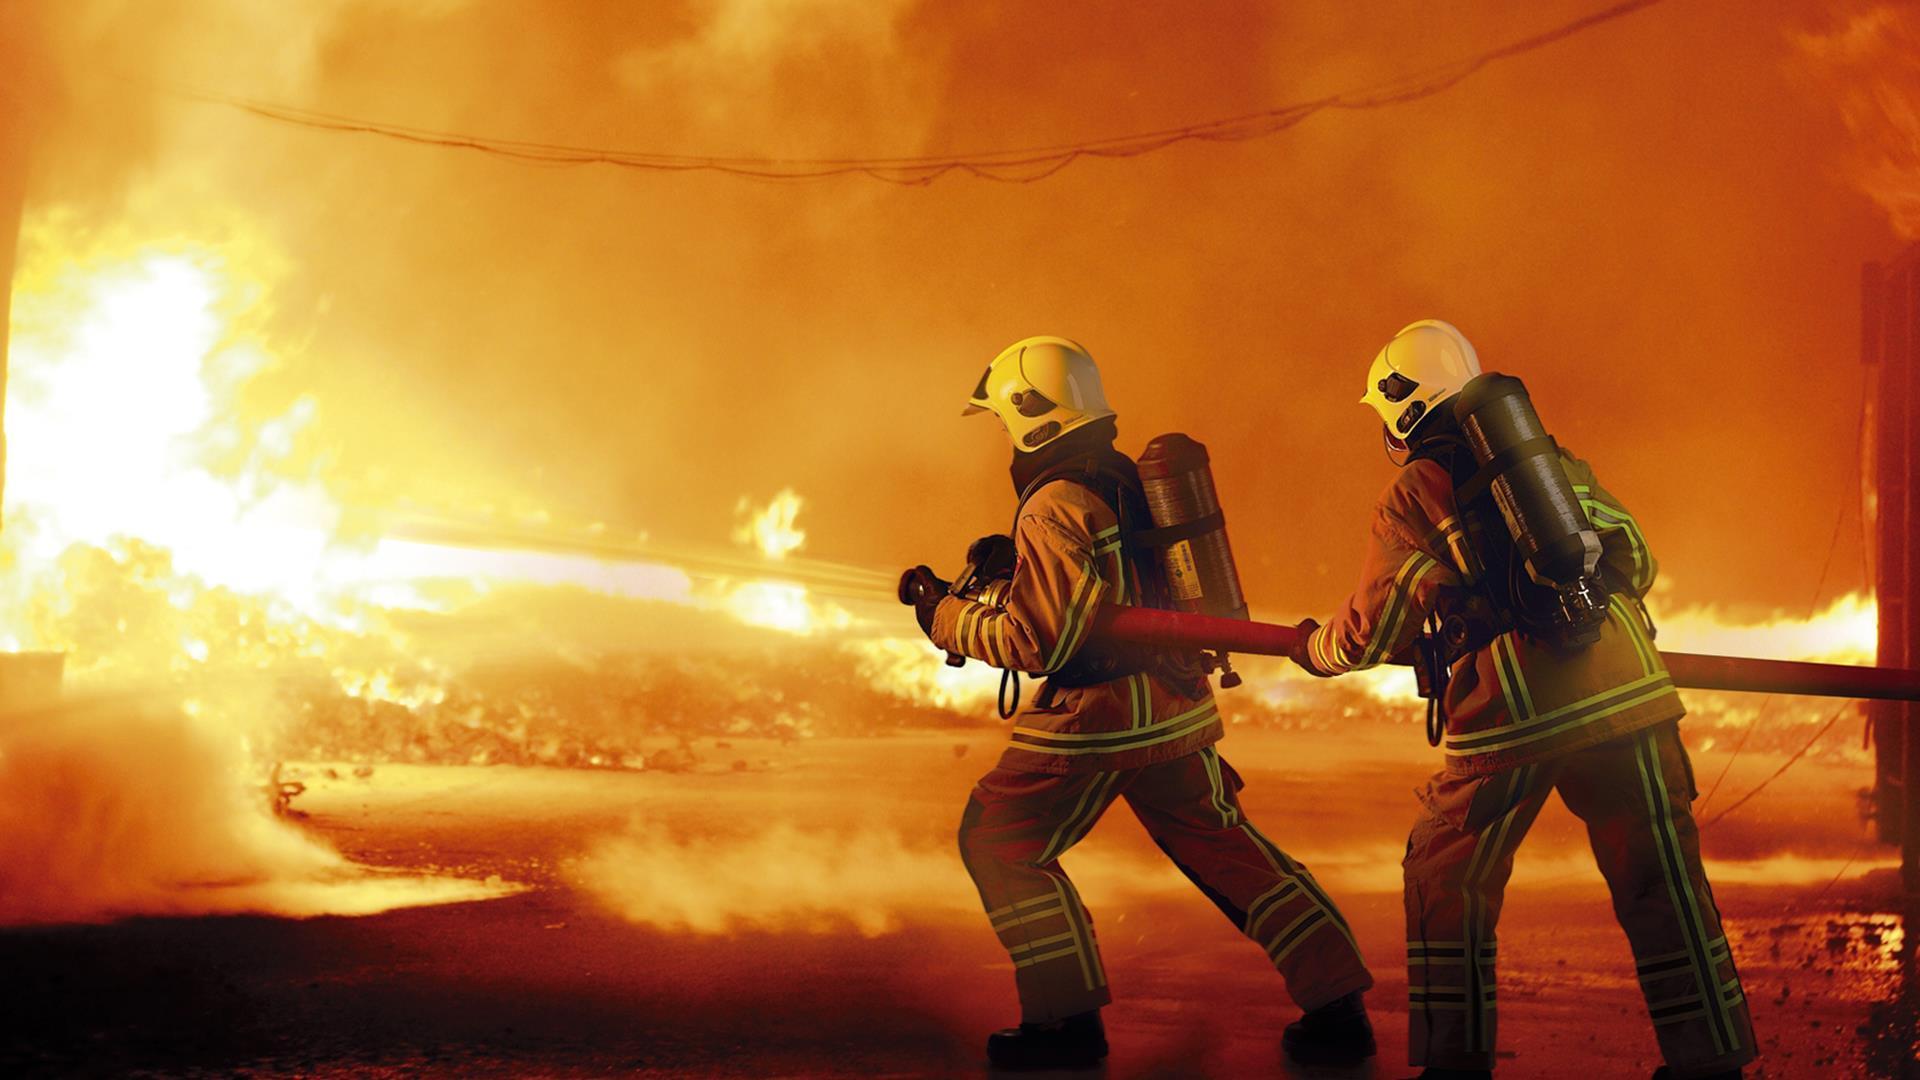 Firefighter Wallpapers - Top Free